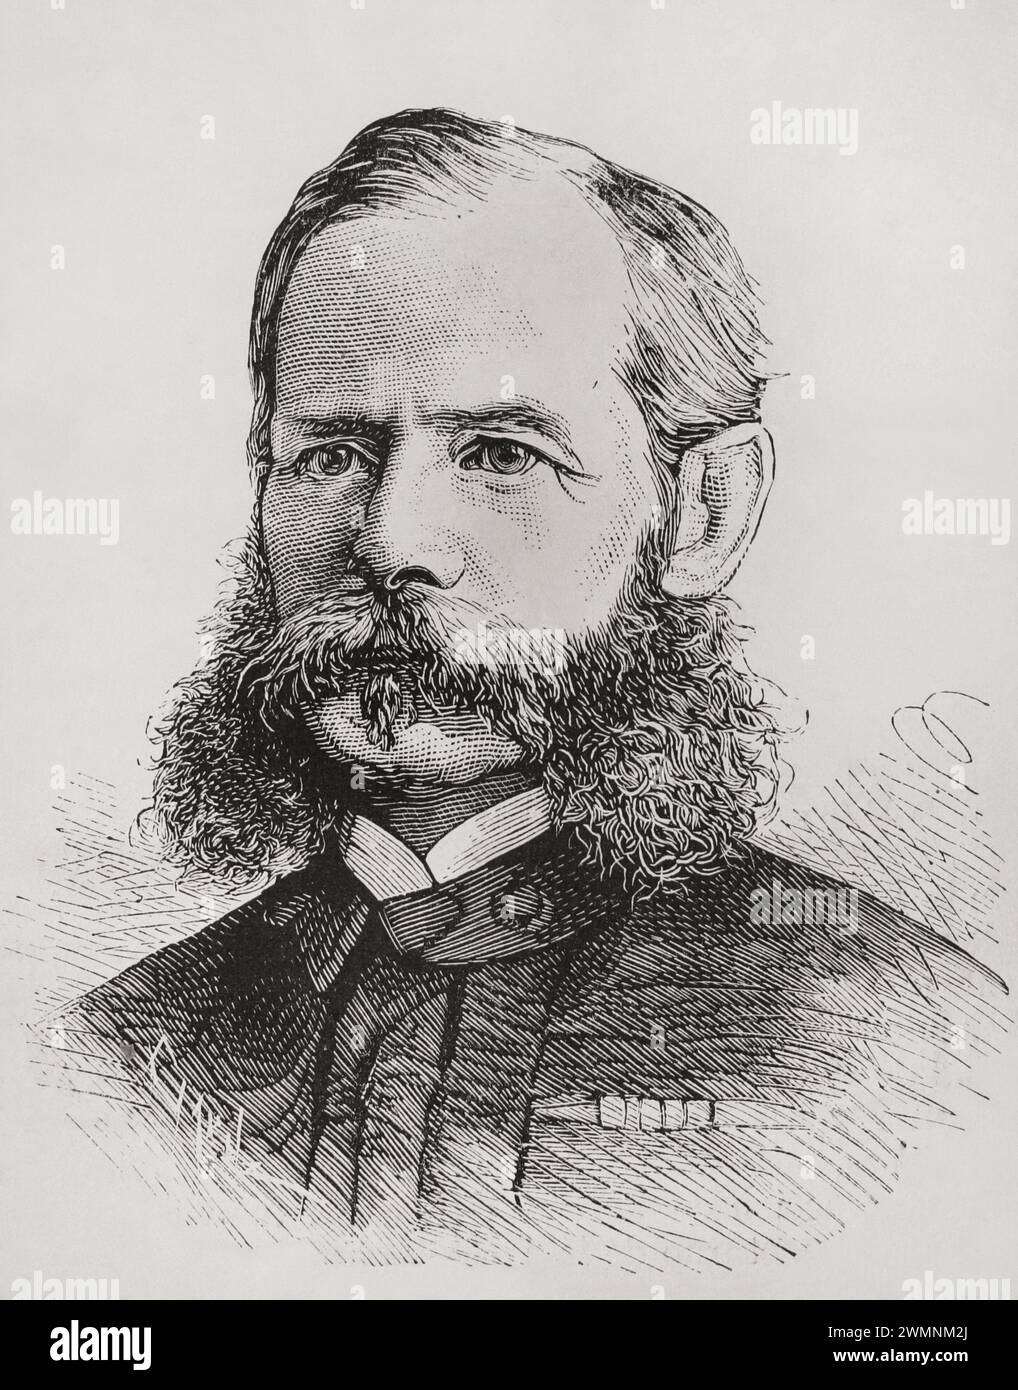 Frederick Sleigh Roberts (1832-1914). British field marshal. 1st Earl Roberts. He fought in the Second Anglo-Afghan War (1878-1880) and the South African War (1899-1902). Portrait. Engraving. La Ilustración Española y Americana (The Spanish and American Illustration), 1878. Stock Photo